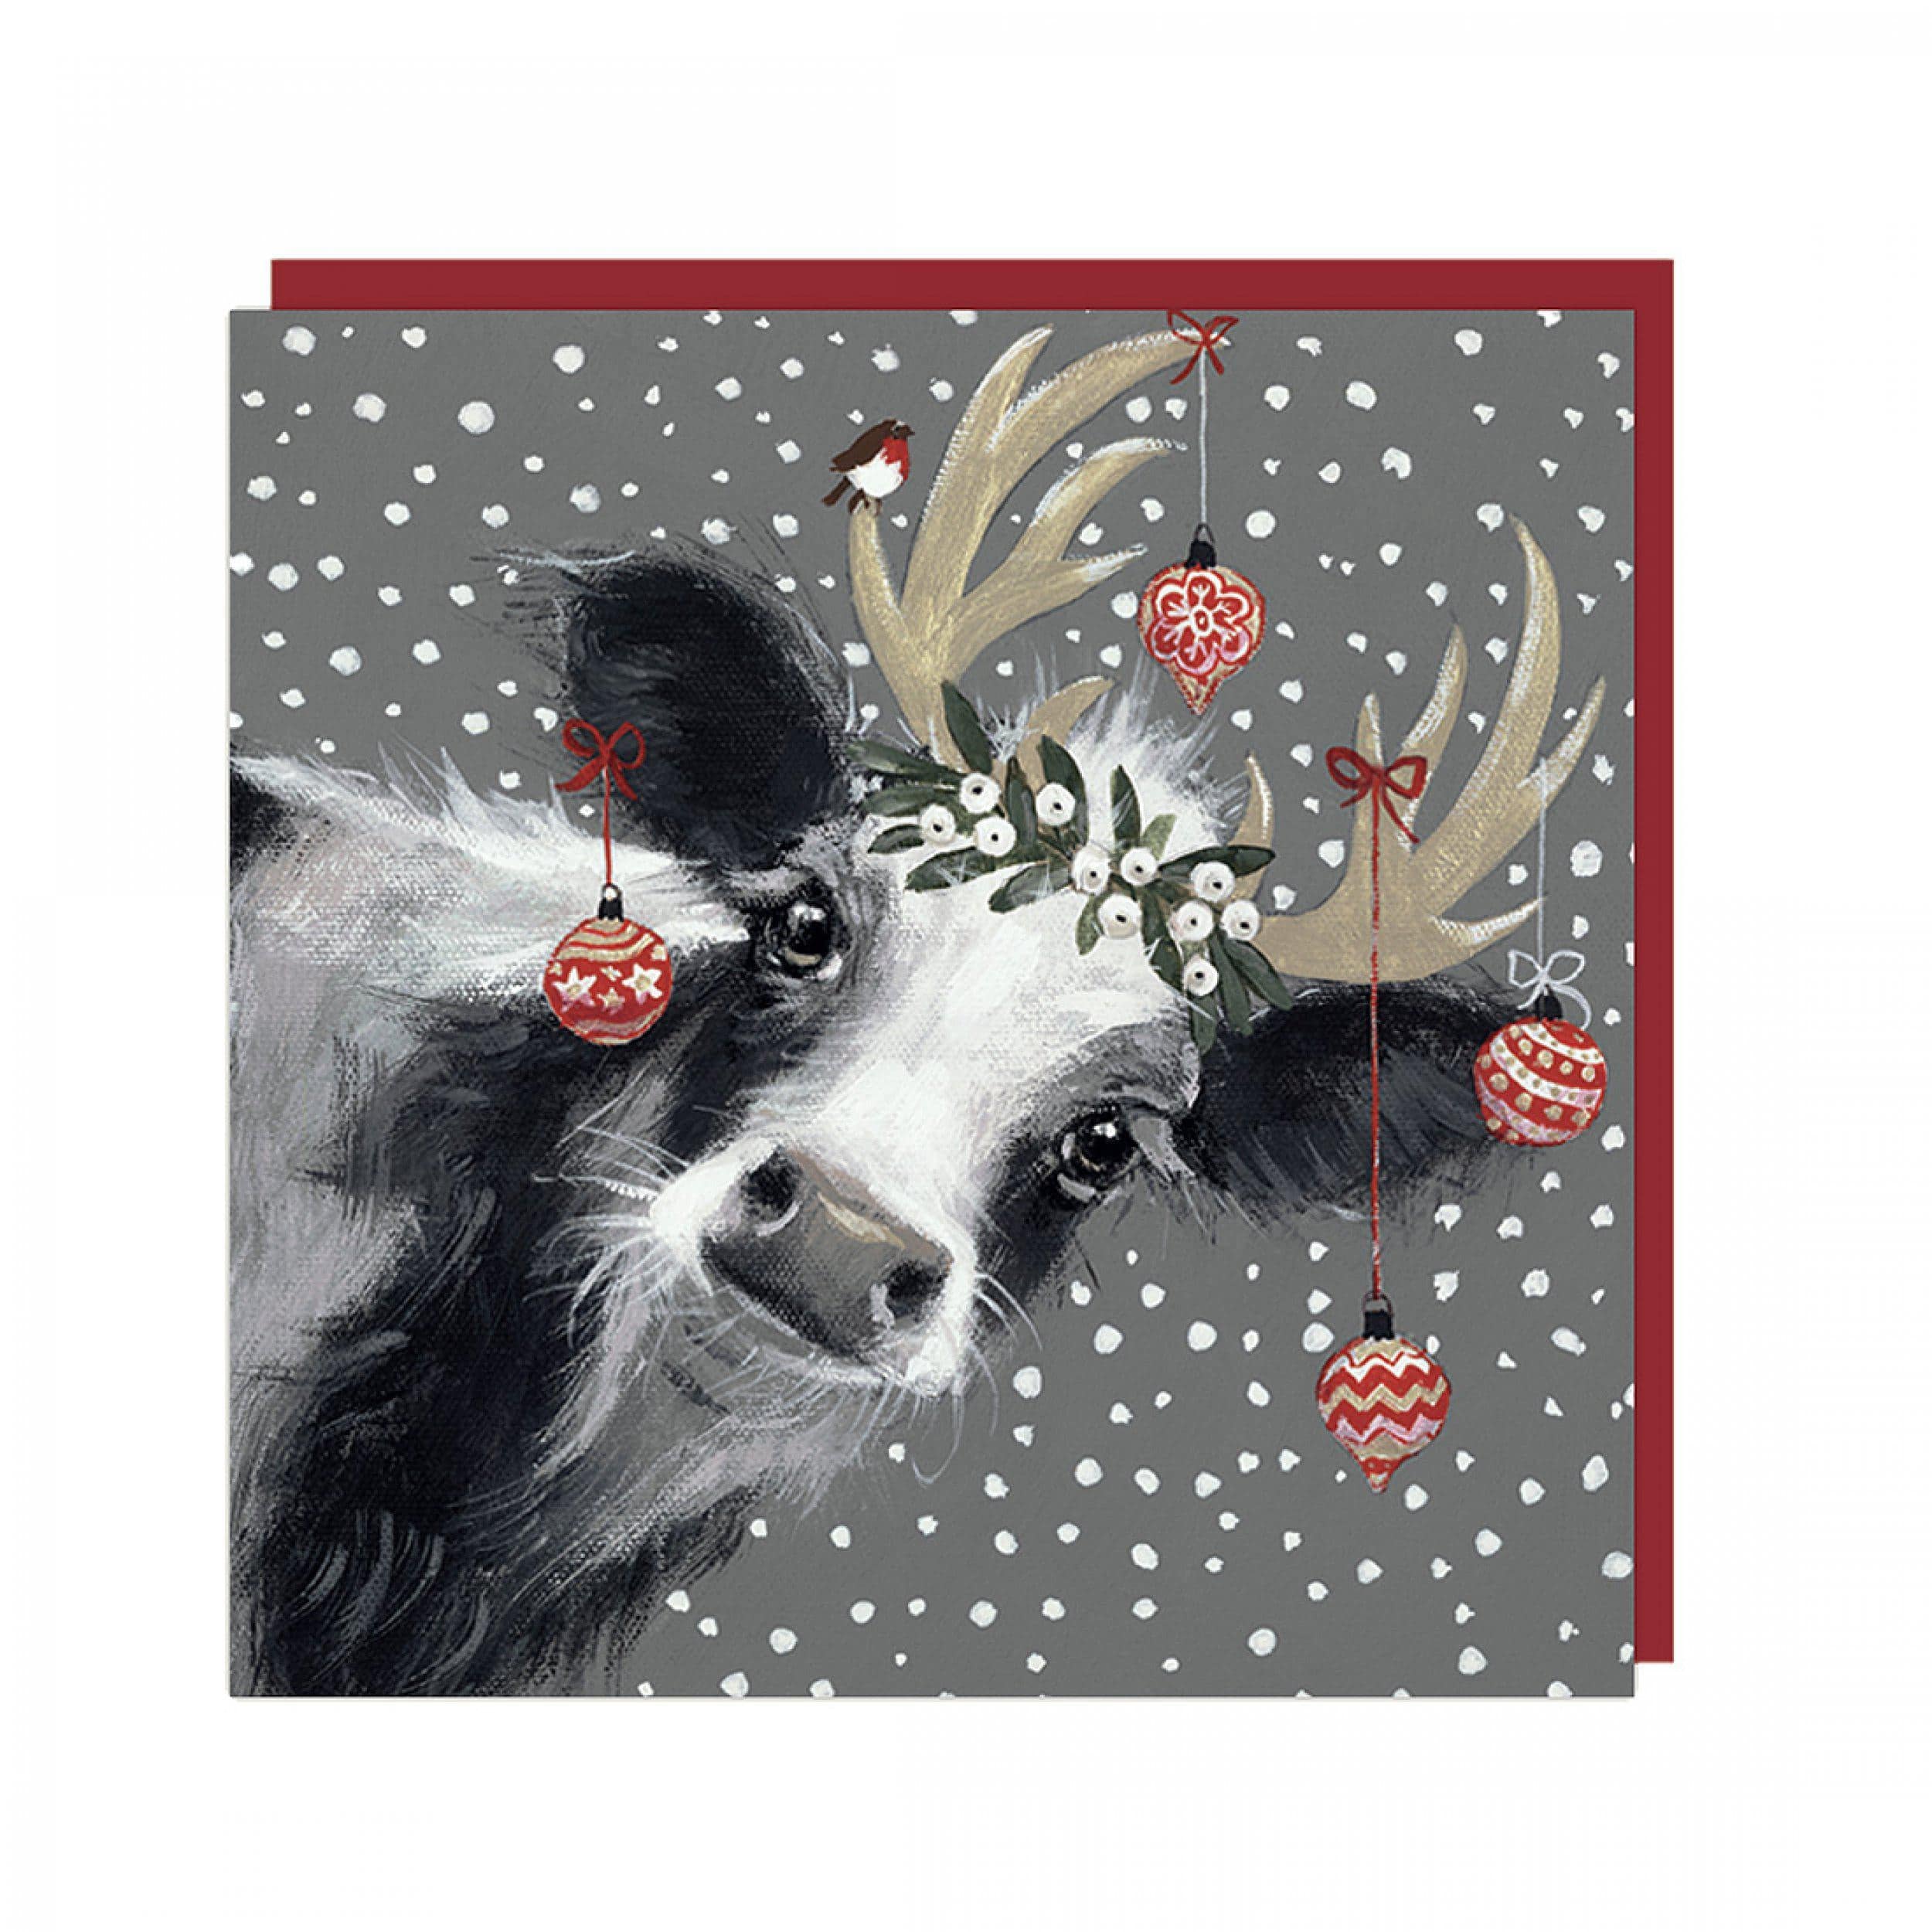 Pack Of 6 Charity Christmas Cards by Artbeat.